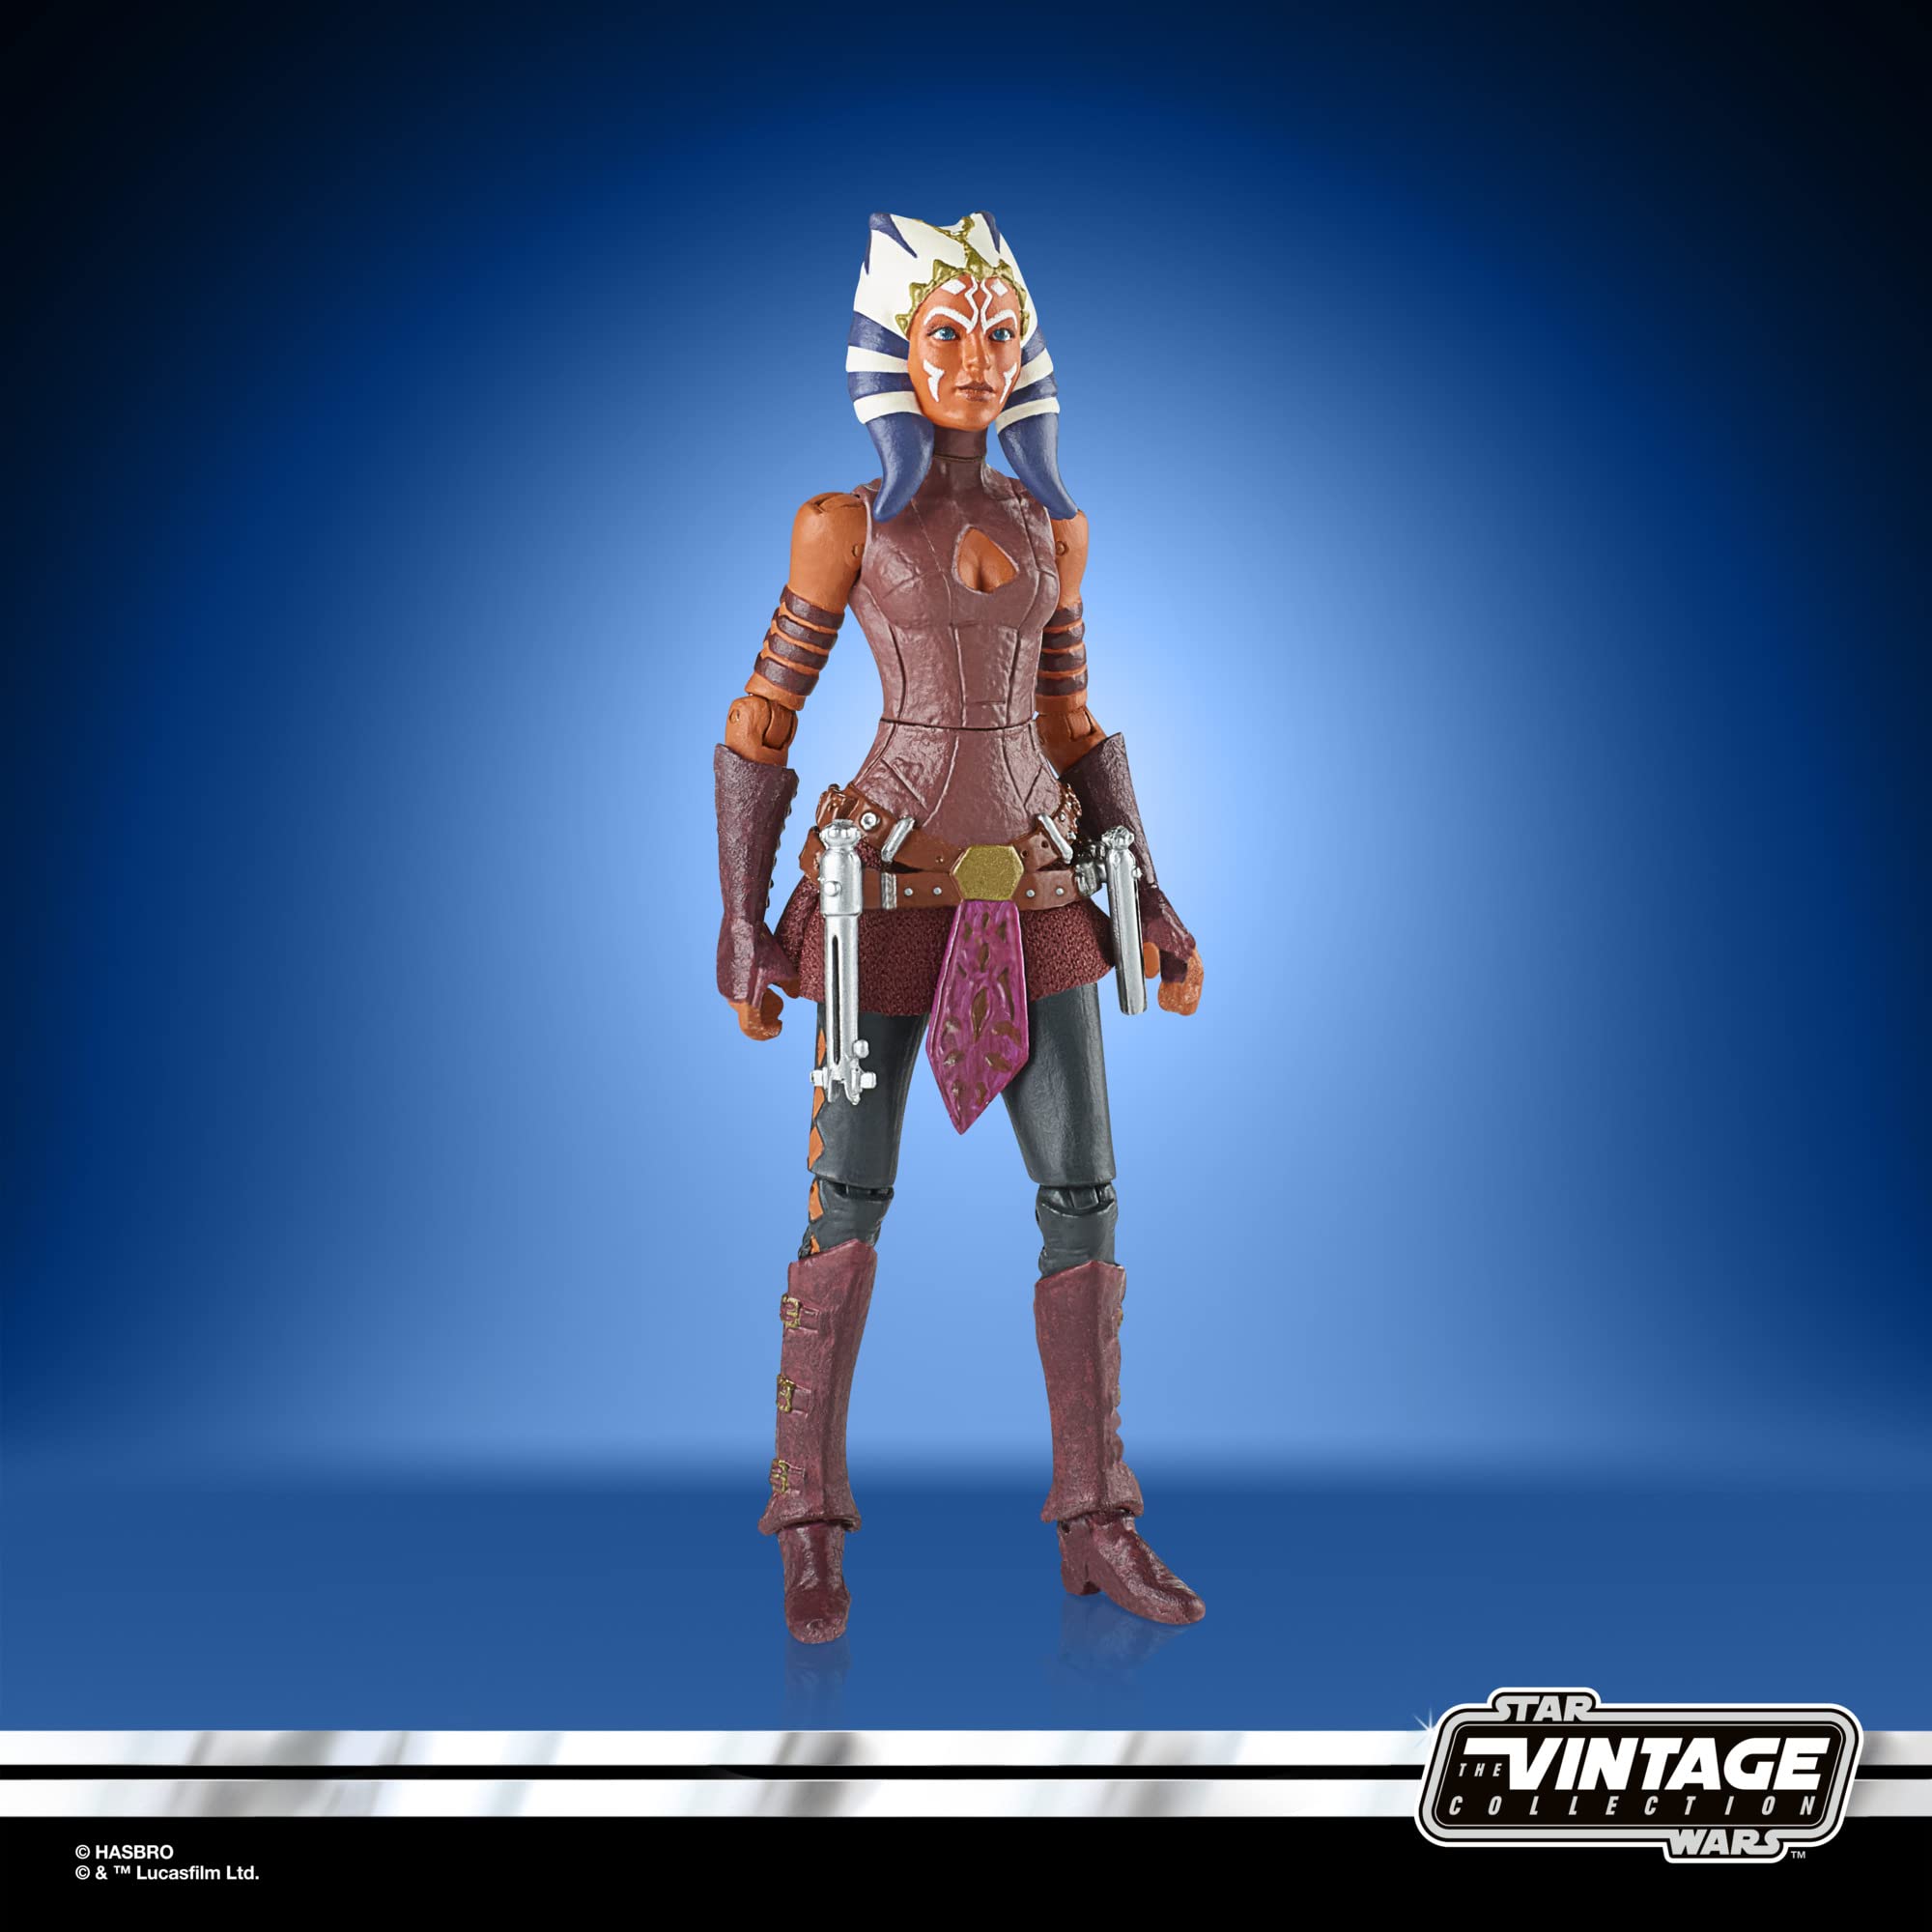 STAR WARS Hasbro The Vintage Collection Ahsoka Toy VC102, 3.75-Inch-Scale The Clone Wars Collectible Action Figure, Kids Ages 4 and Up